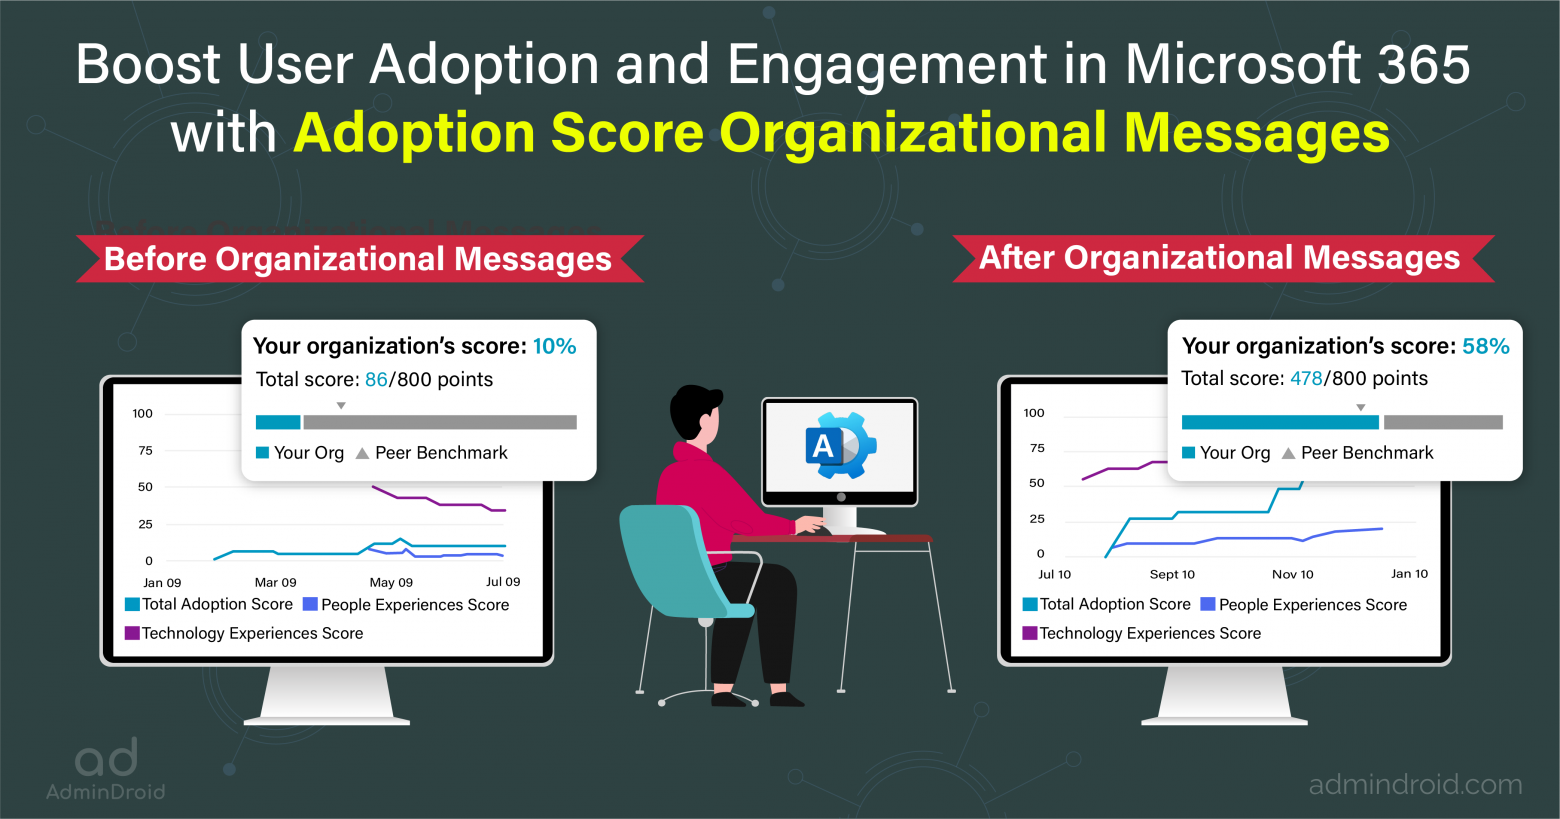 Boost Adoption Score in Microsoft 365 with Organizational Messages